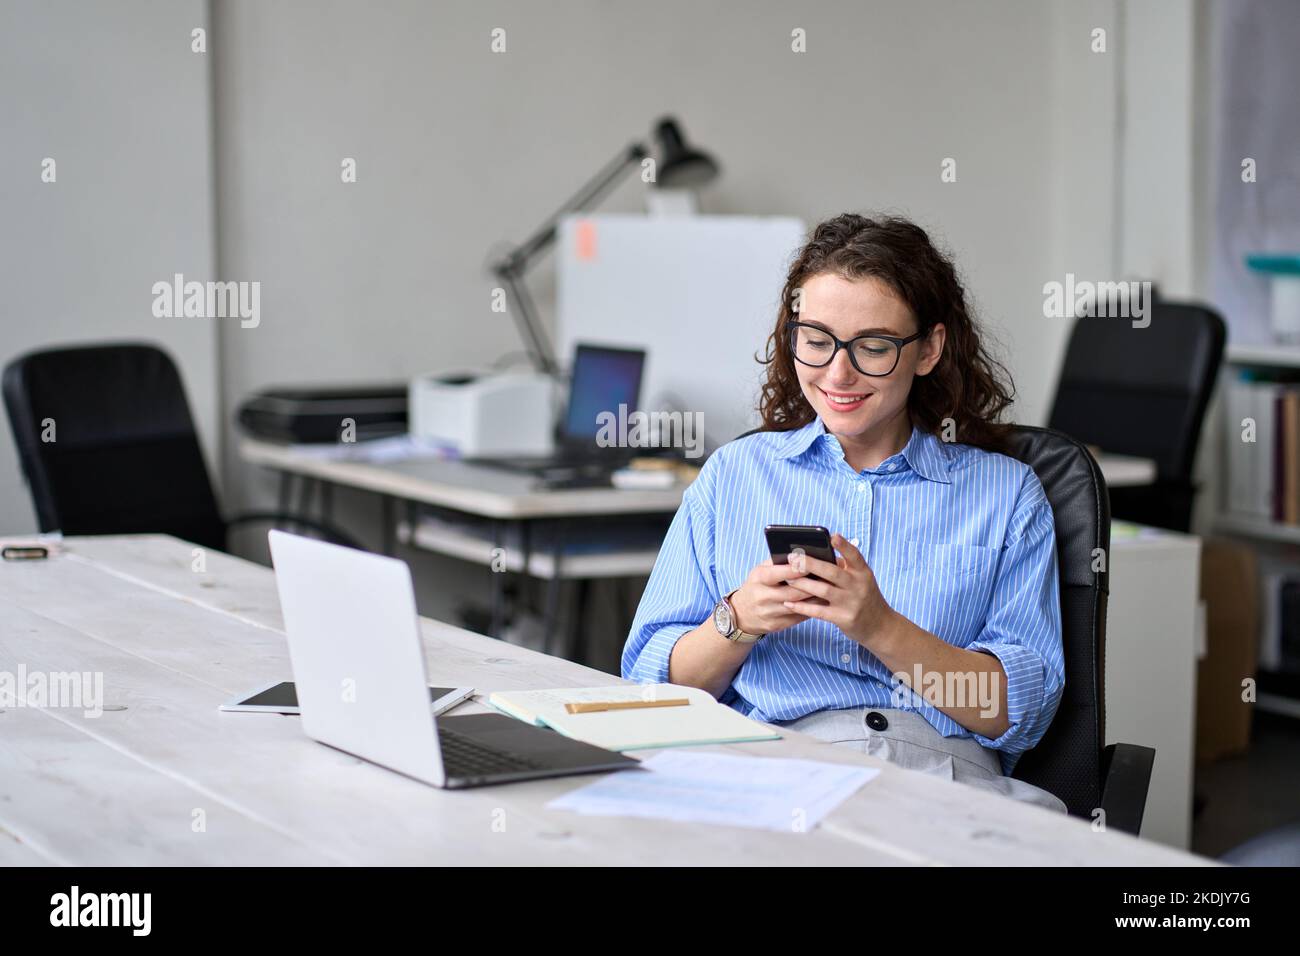 Young business woman using cellphone working in office sitting at desk. Stock Photo